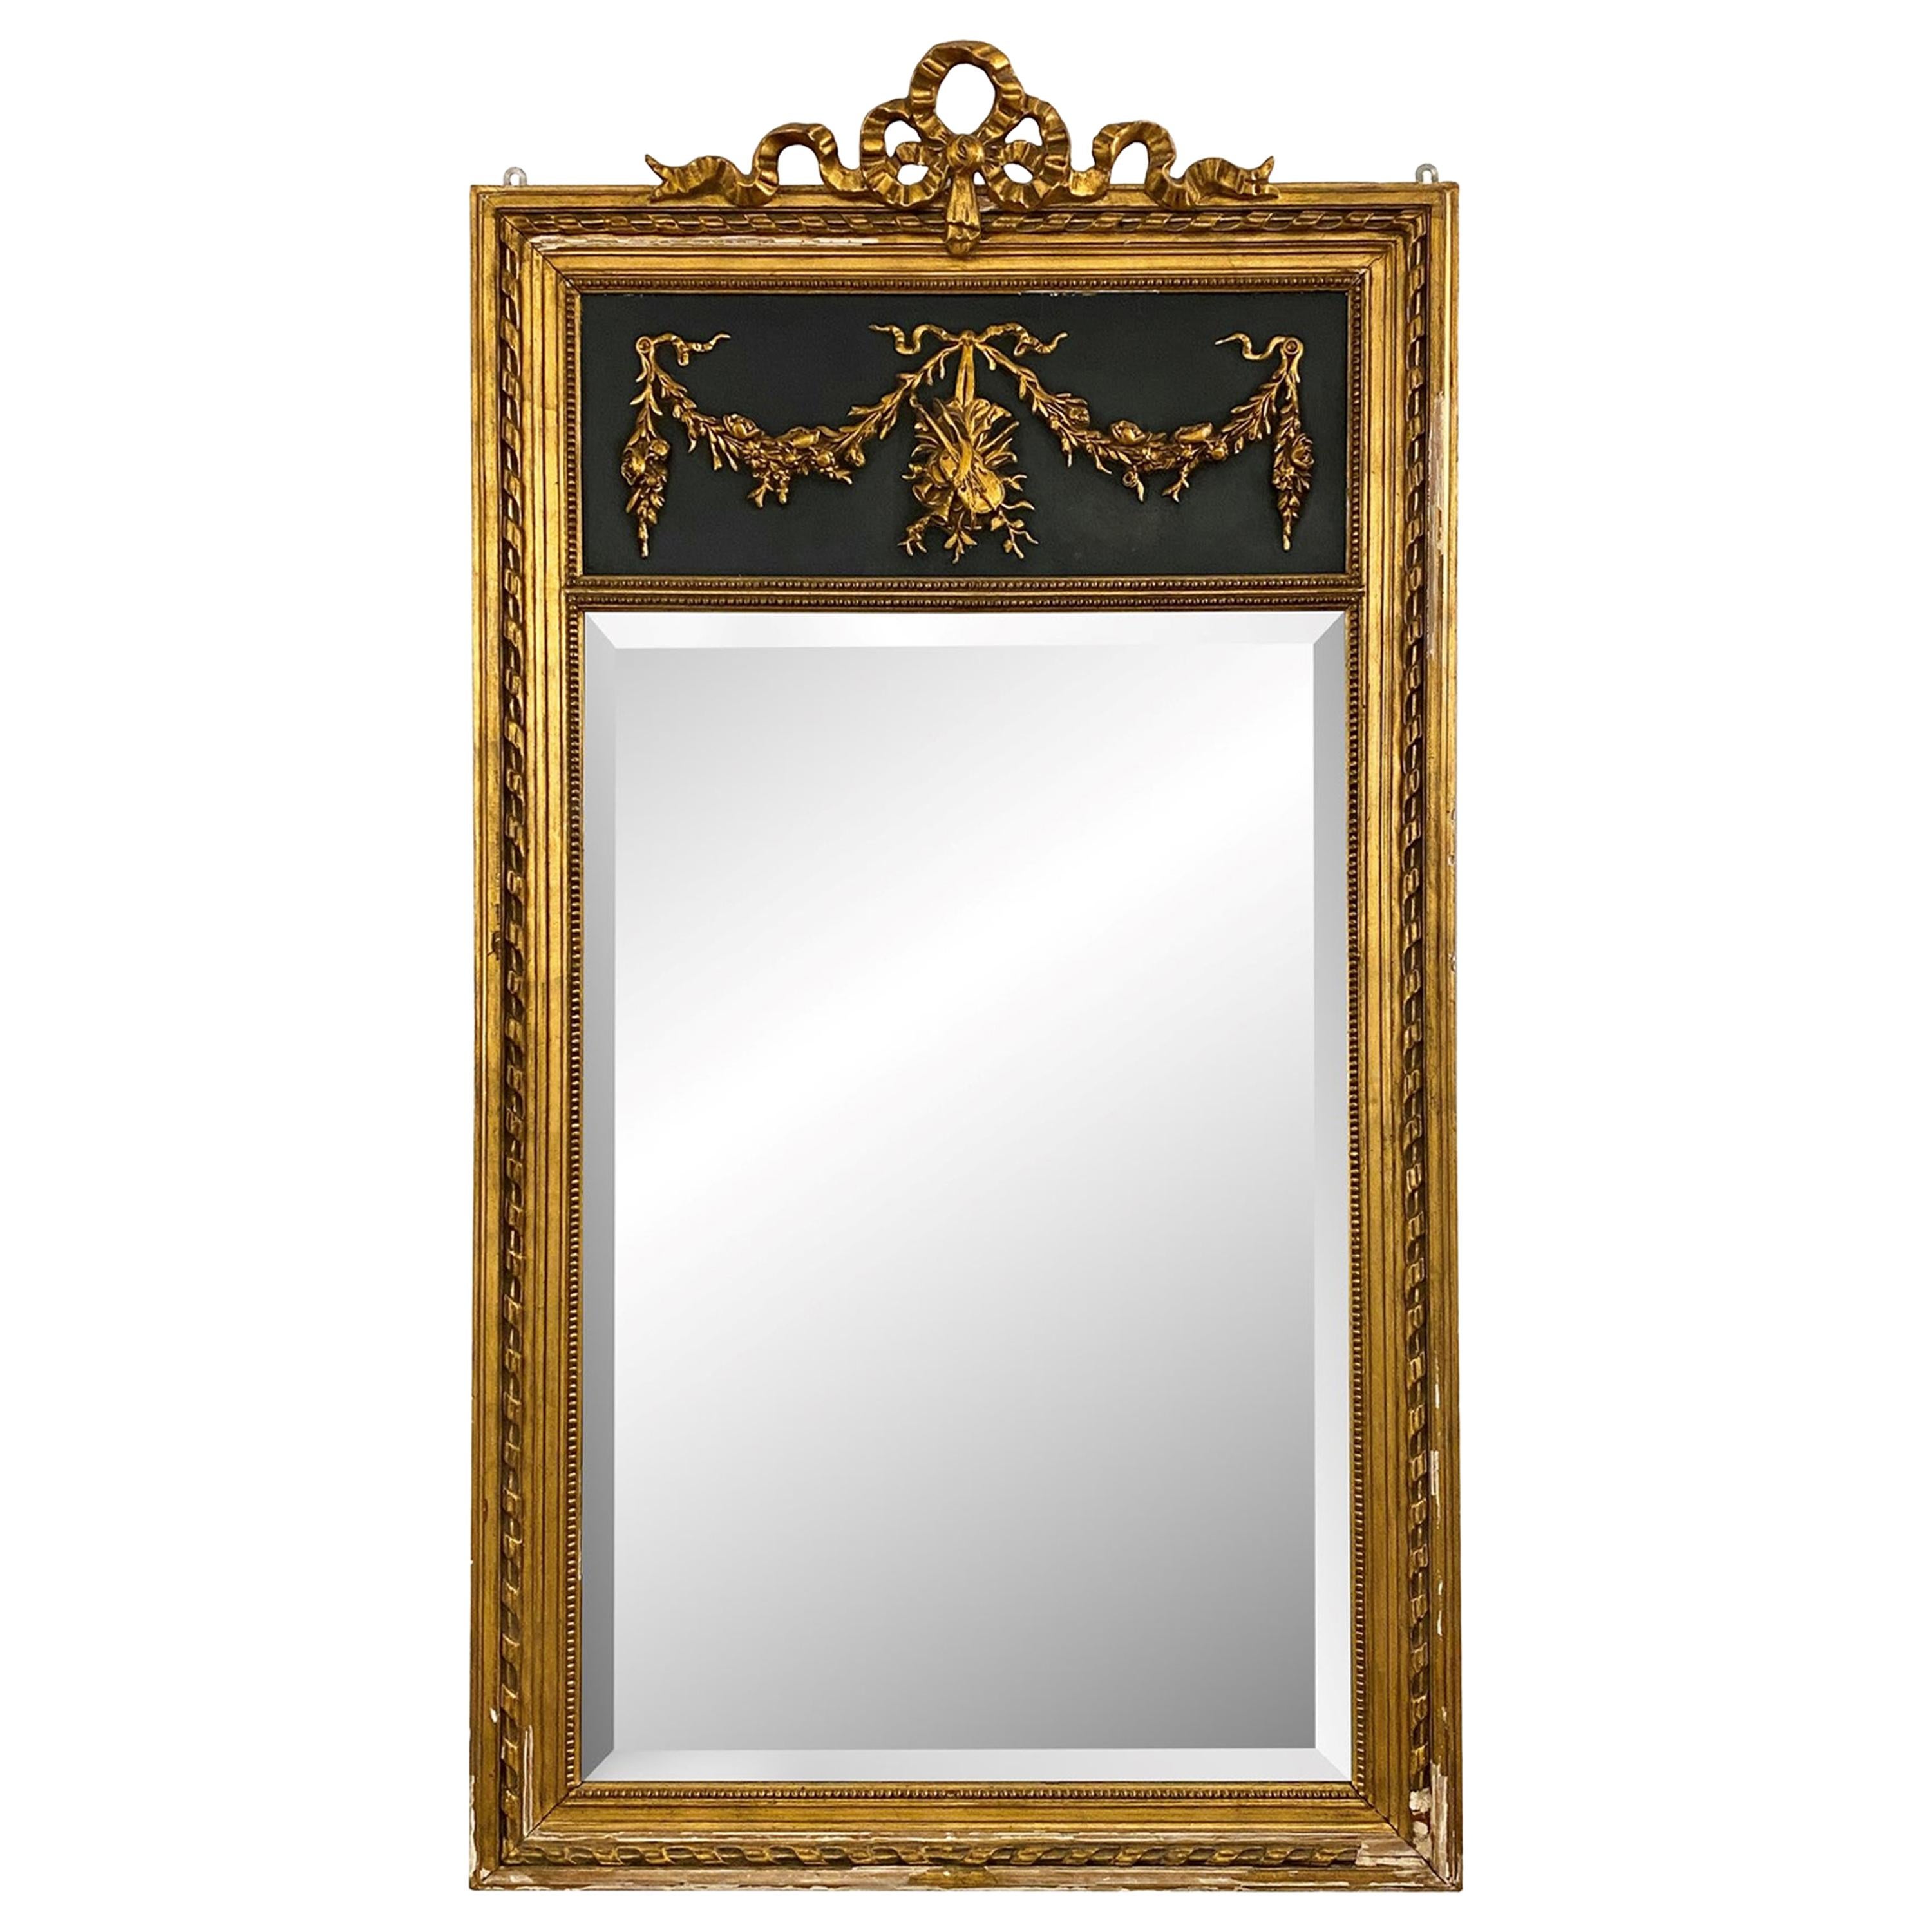 1880s French Trumeau Mirror from Gilded Wood and Beveled Mirror